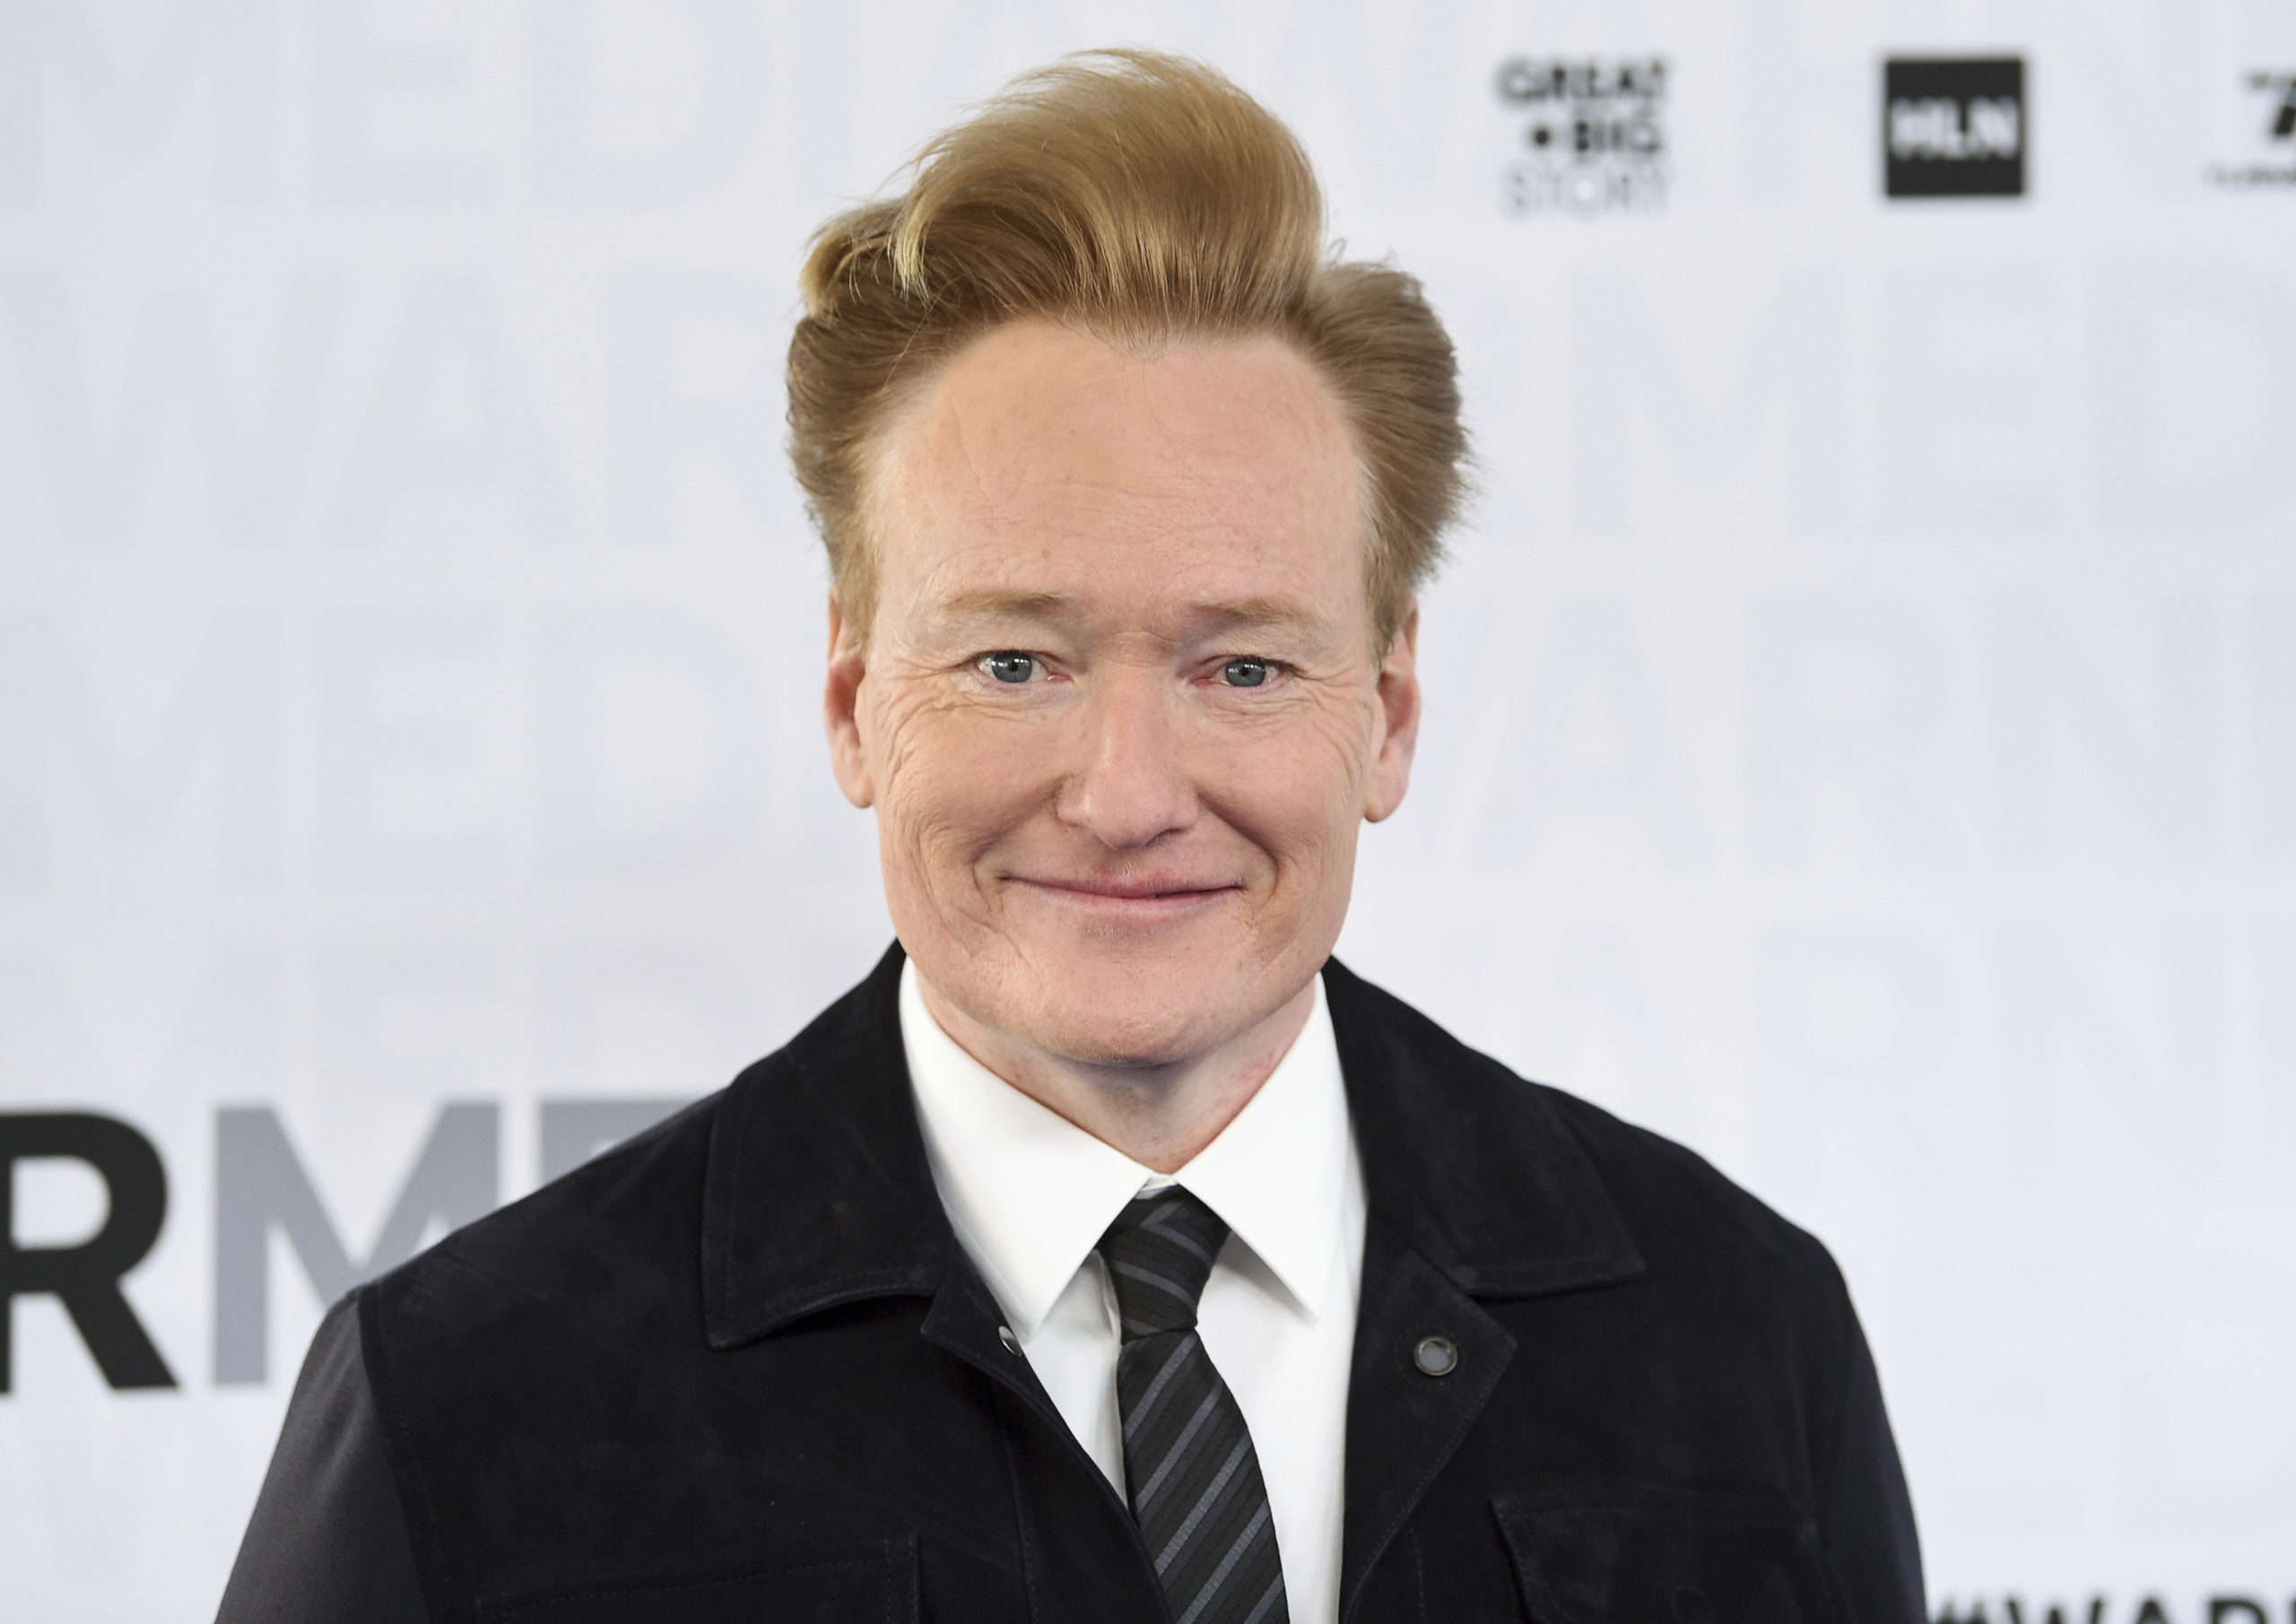 Conan O Brien Claims NBC BAN Norm Macdonald from late night show TV Star remembers Late Comedian!